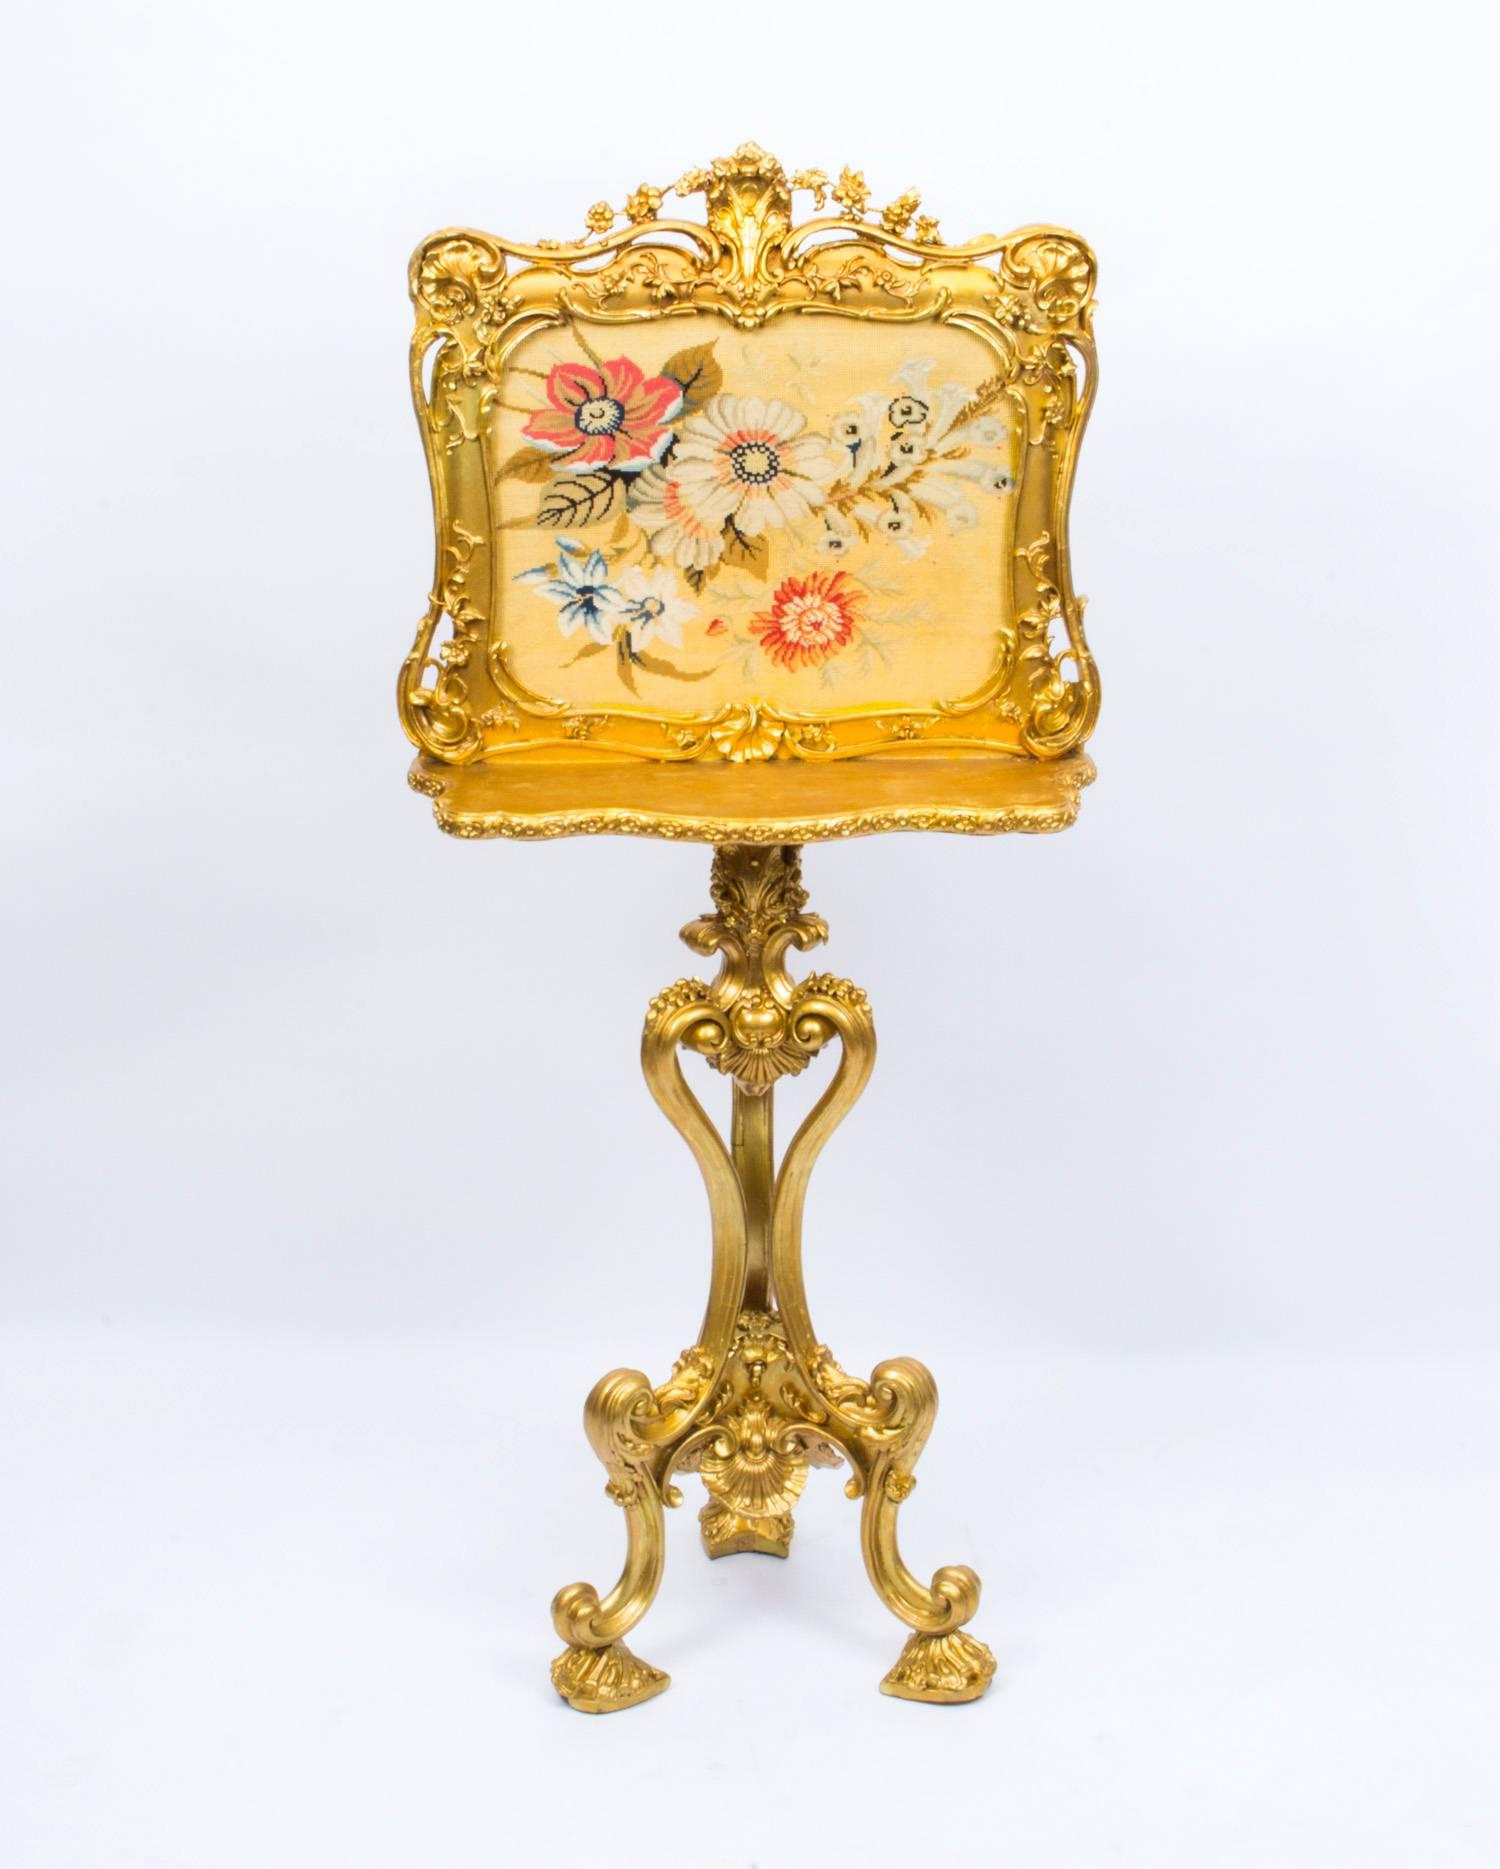 This is a beautiful English antique Victorian giltwood screen, circa 1850 in date. 

It features a woolwork floral tapestry with a shelf to the front and stands on elaborate Rococo supports.

It bears the makers label for 'John Tozer, Carver,